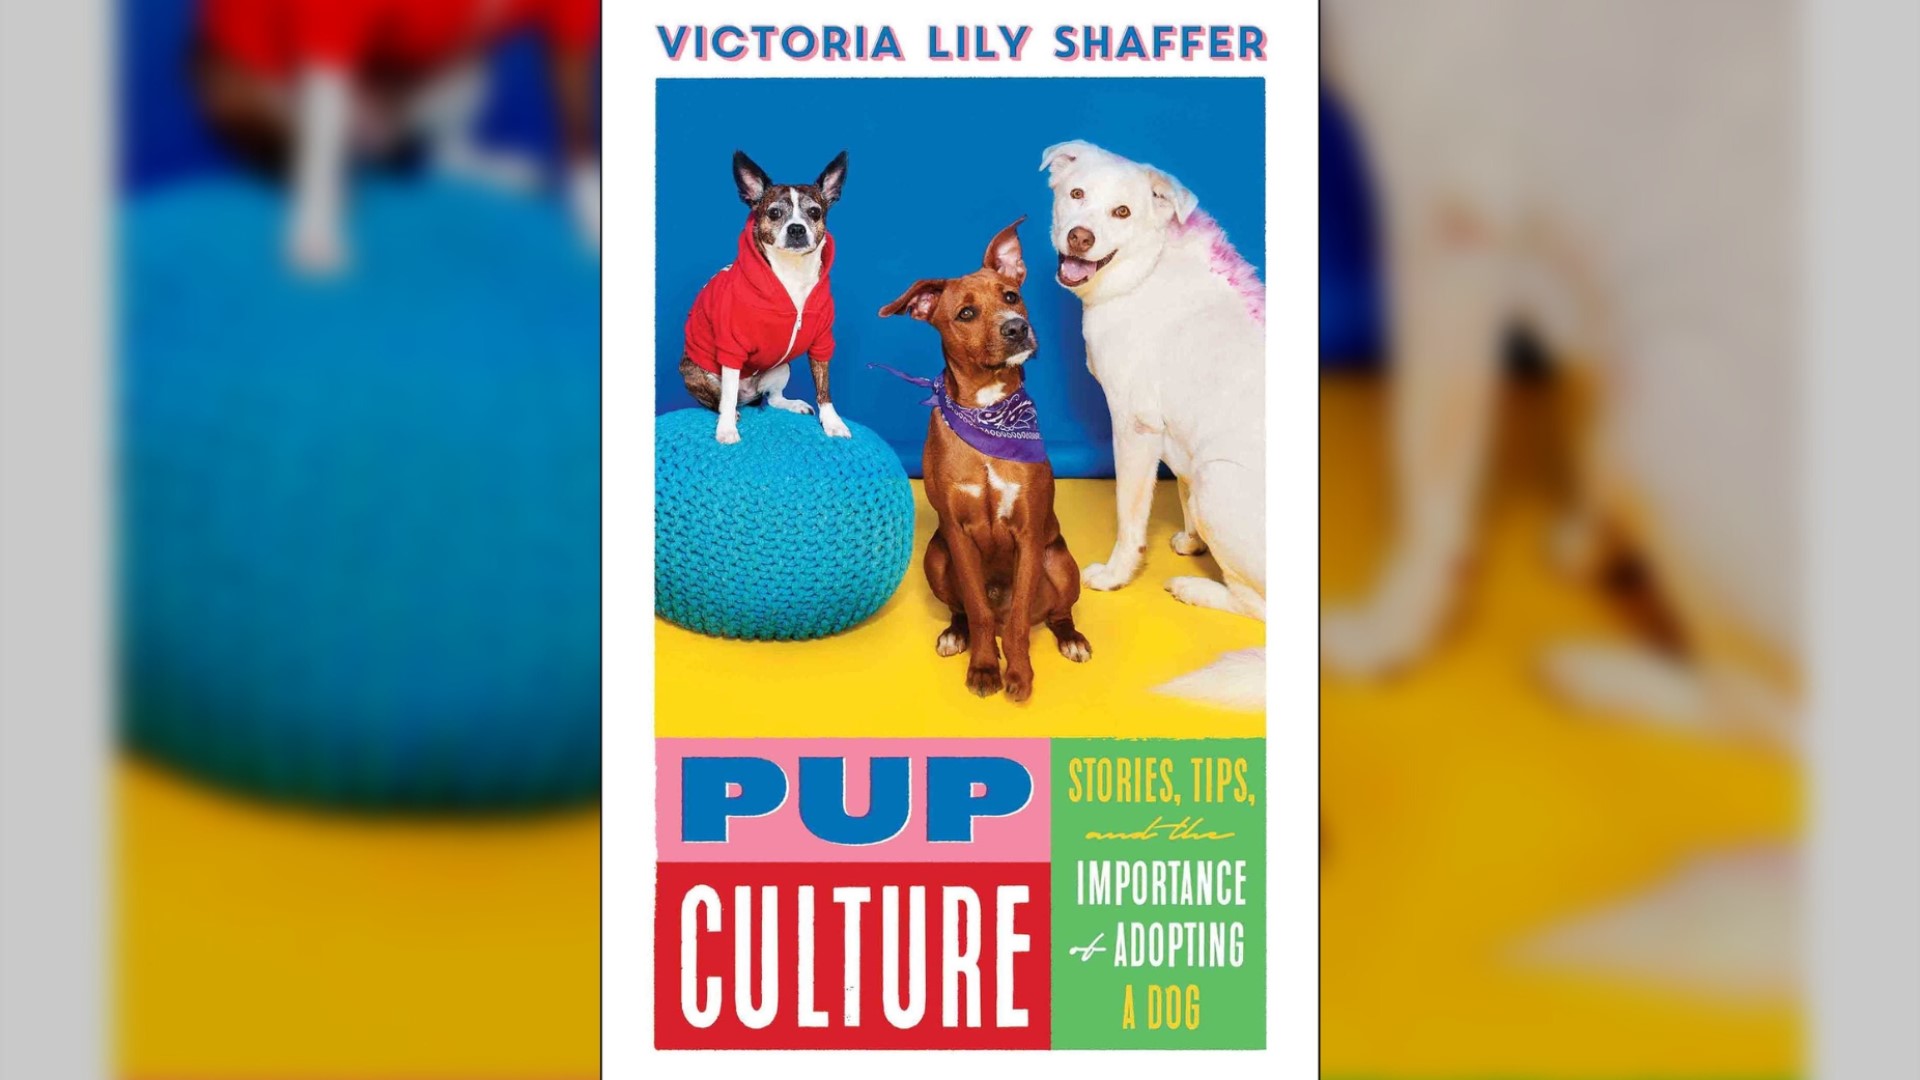 "Pup Culture" by Victoria Lily Shaffer features stories and lessons to help guide you through the process of dog adoption. #newdaynw